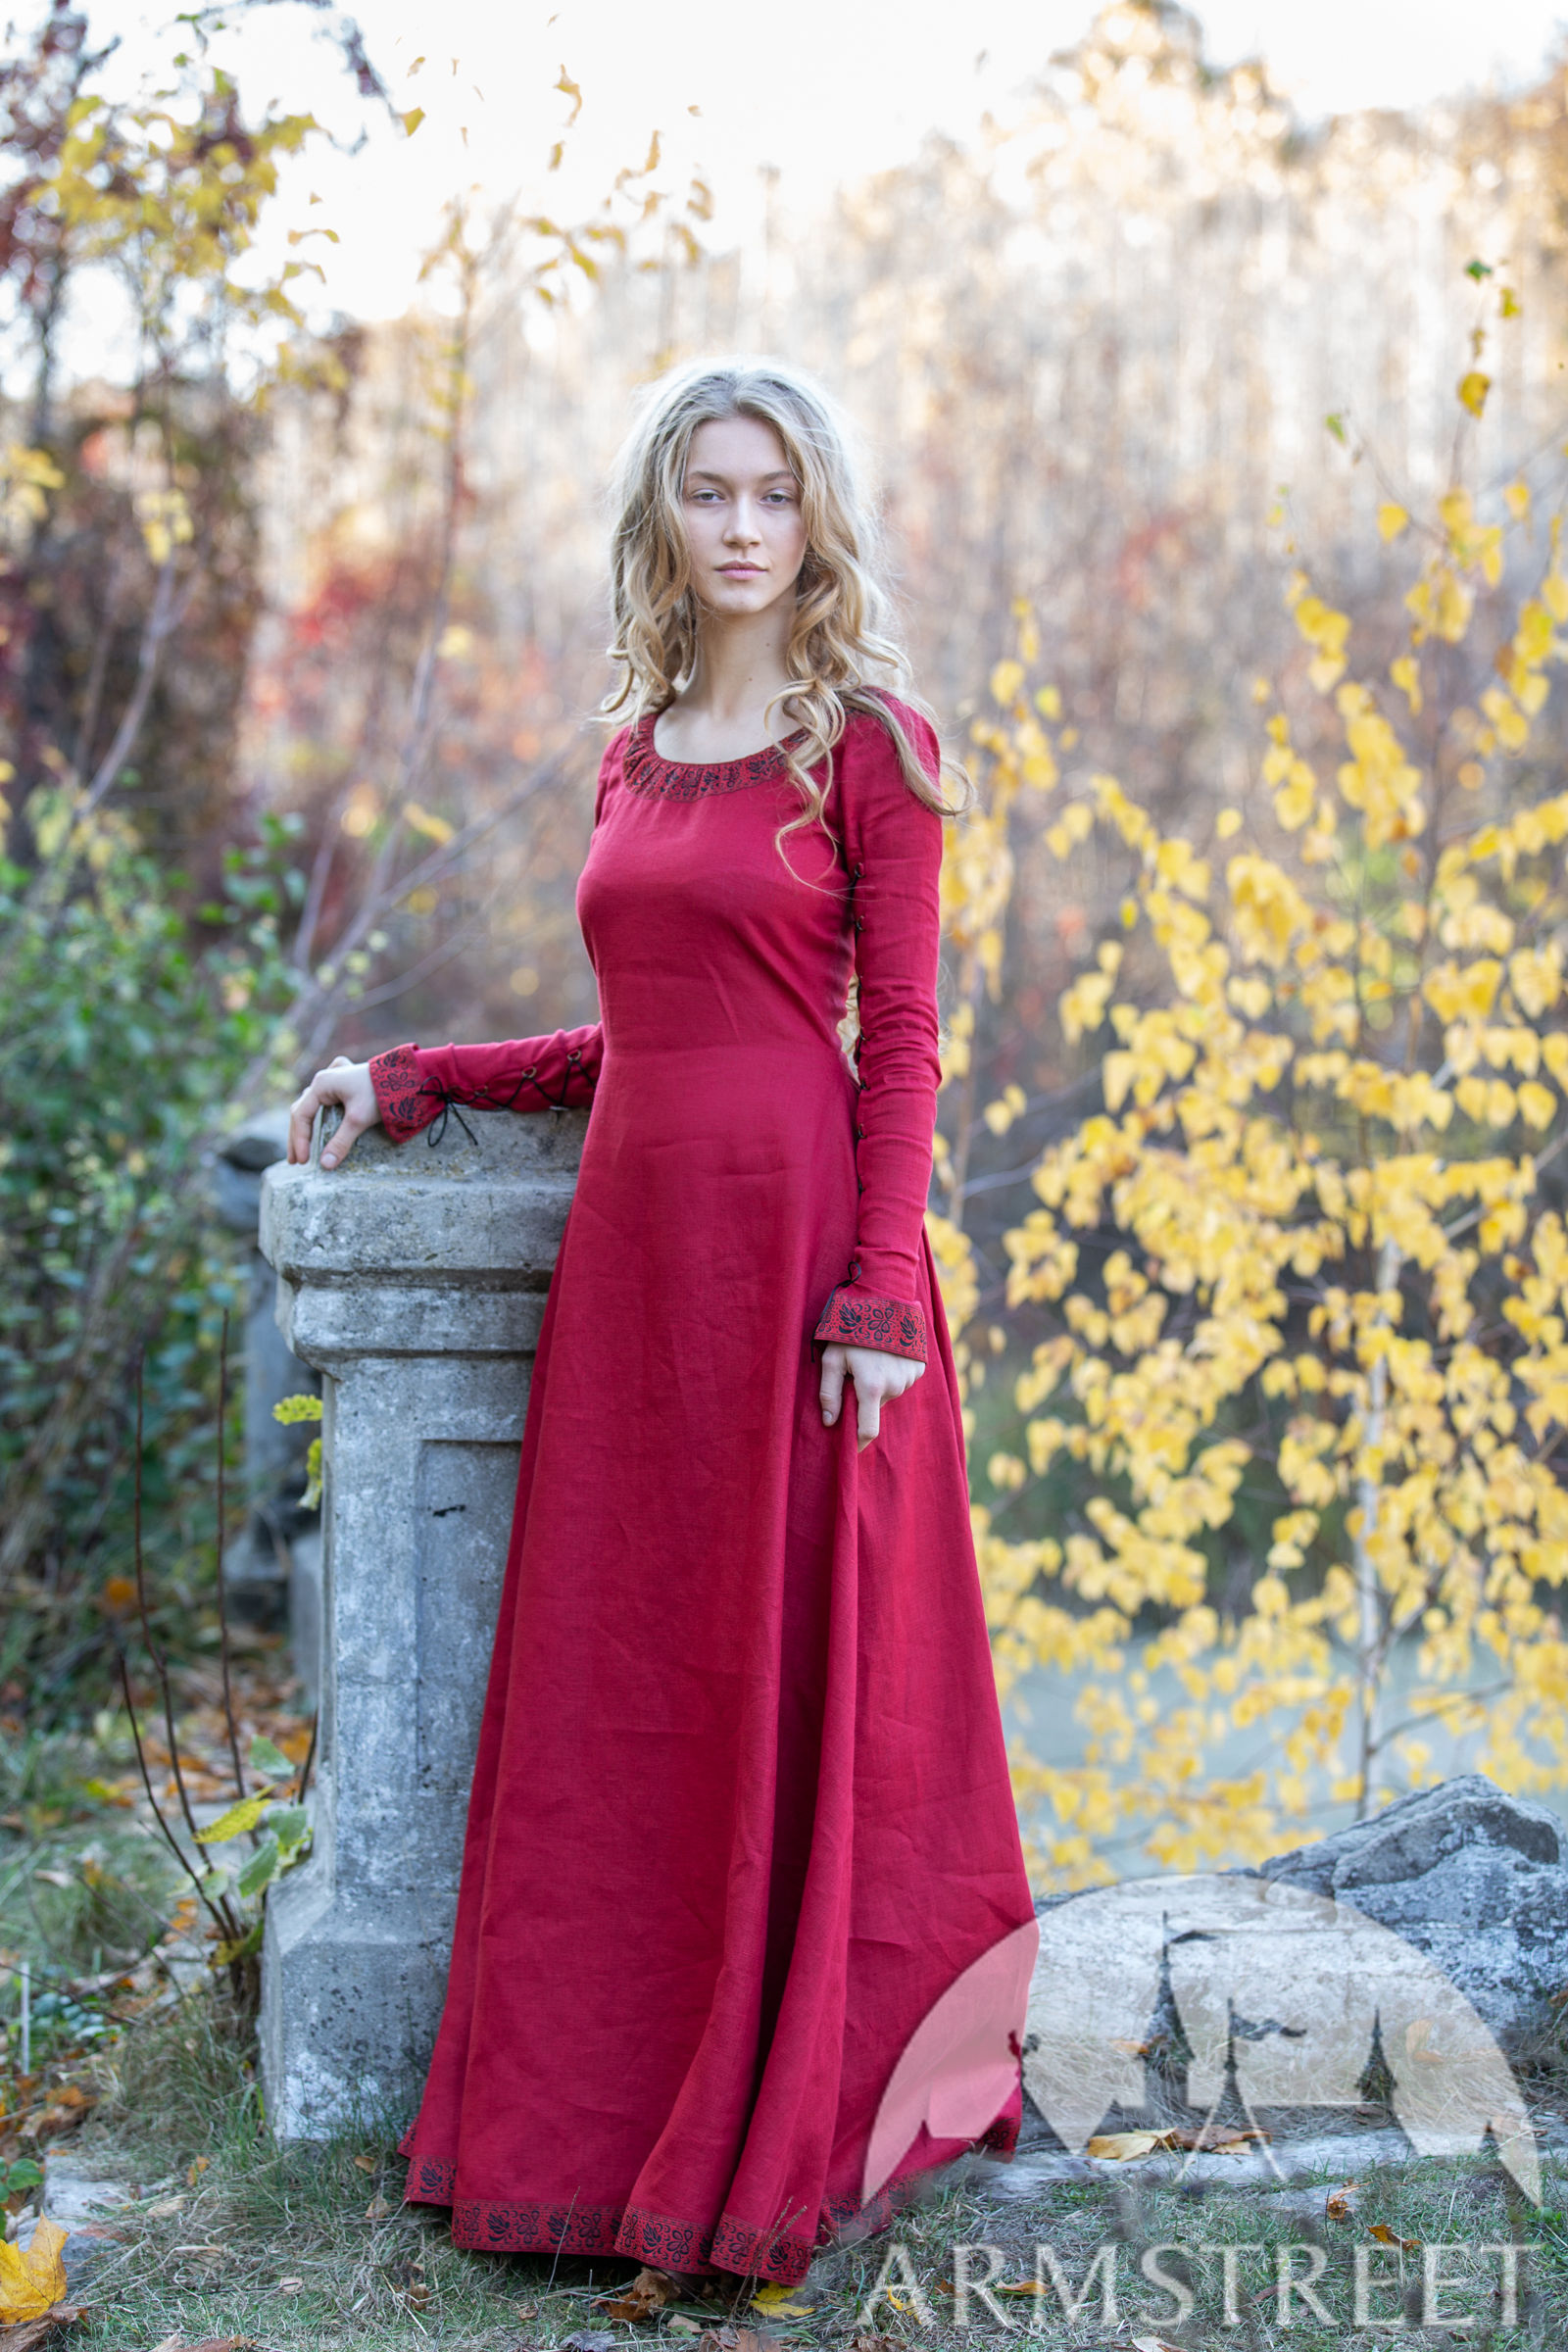 Fantasy linen dress "Autumn Princess" for sale. Available in: green